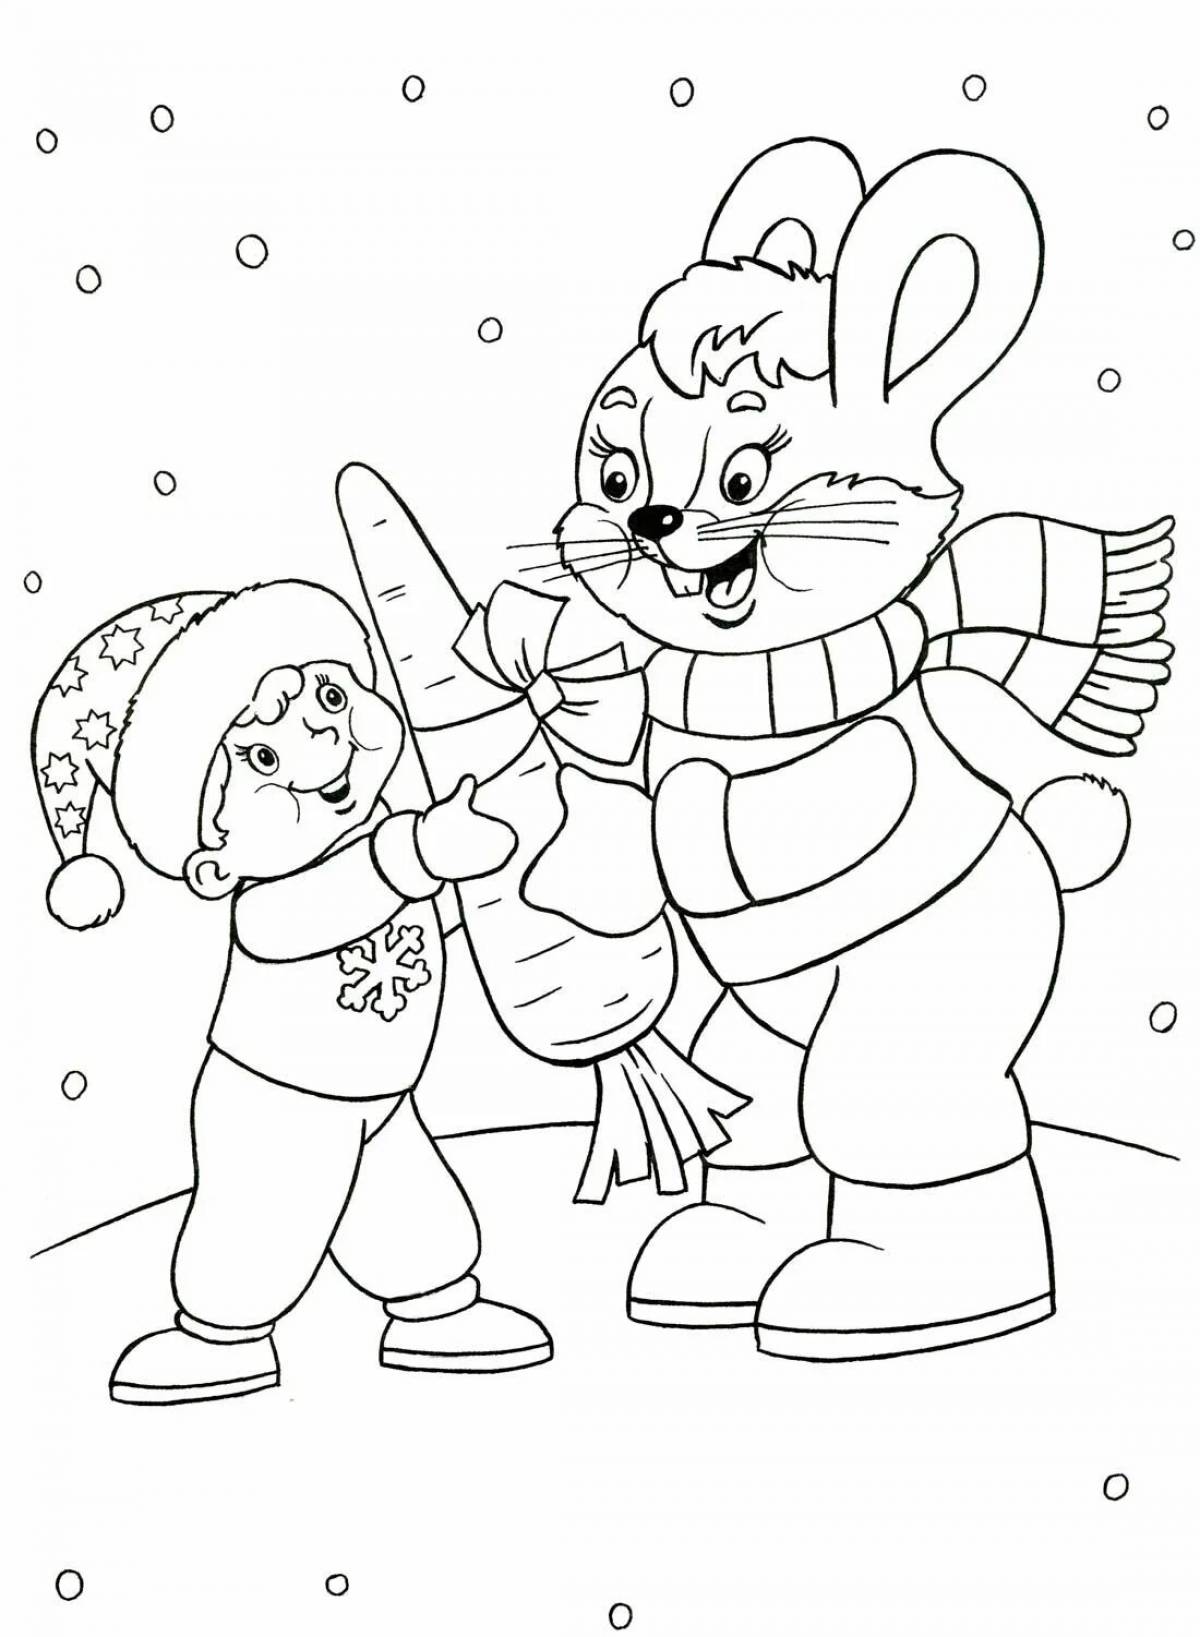 Coloring pages Christmas bunny with crazy colors